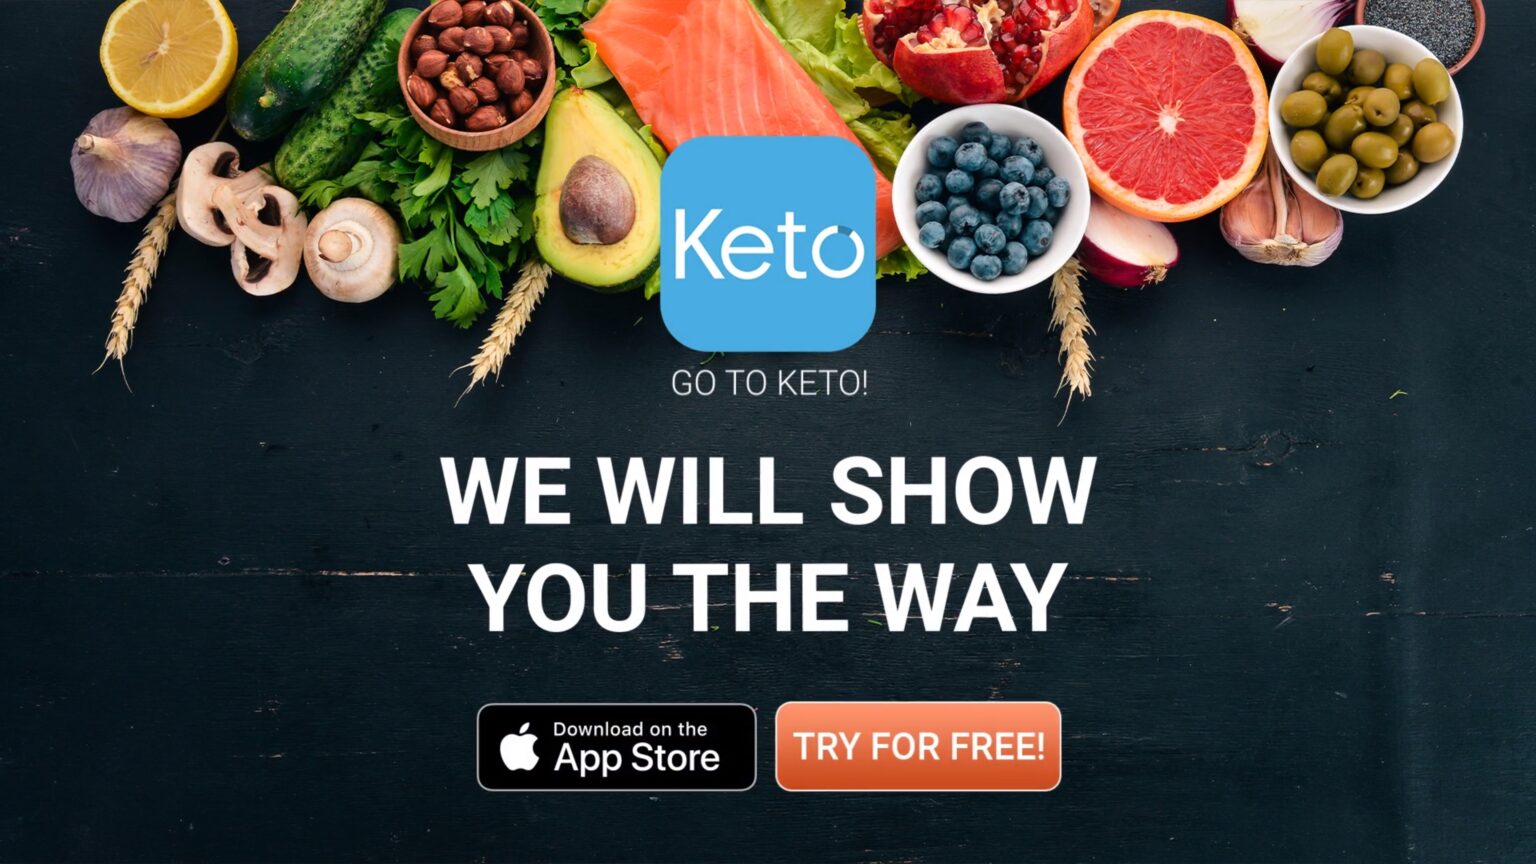 Animated and Live Action Videos for Keto.app cover final screen